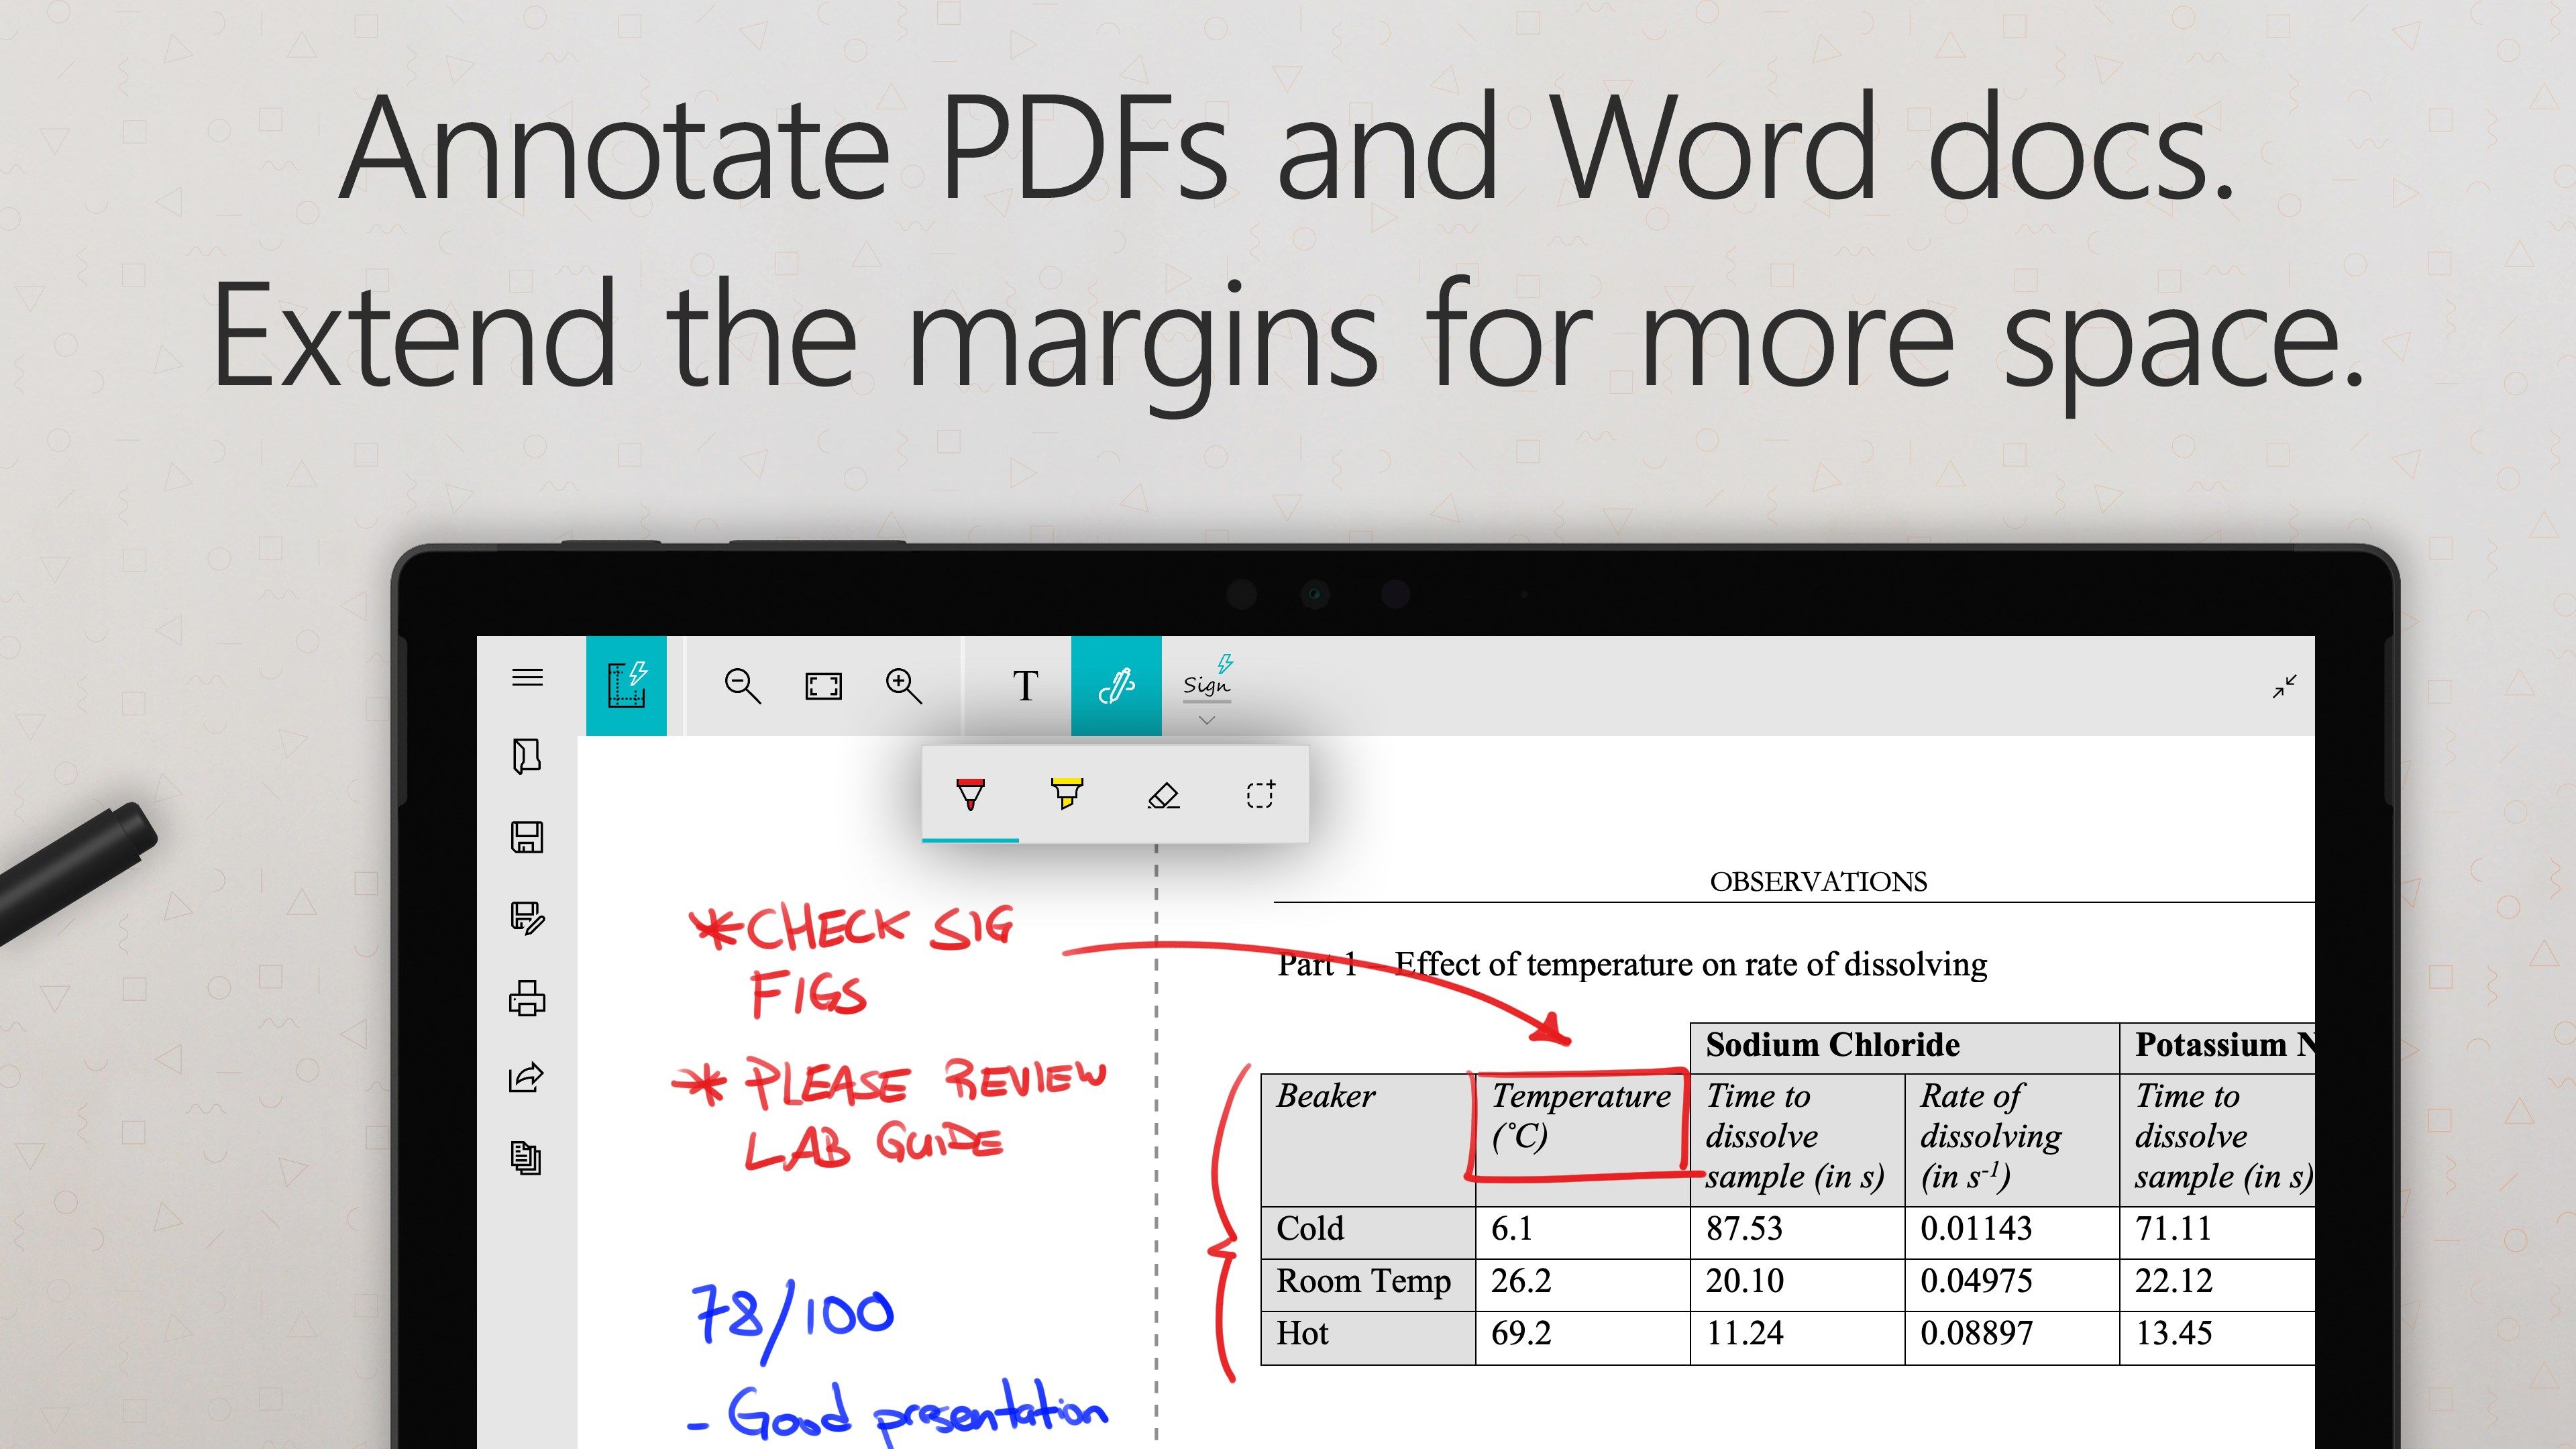 Annotate PDFs and Word docs.